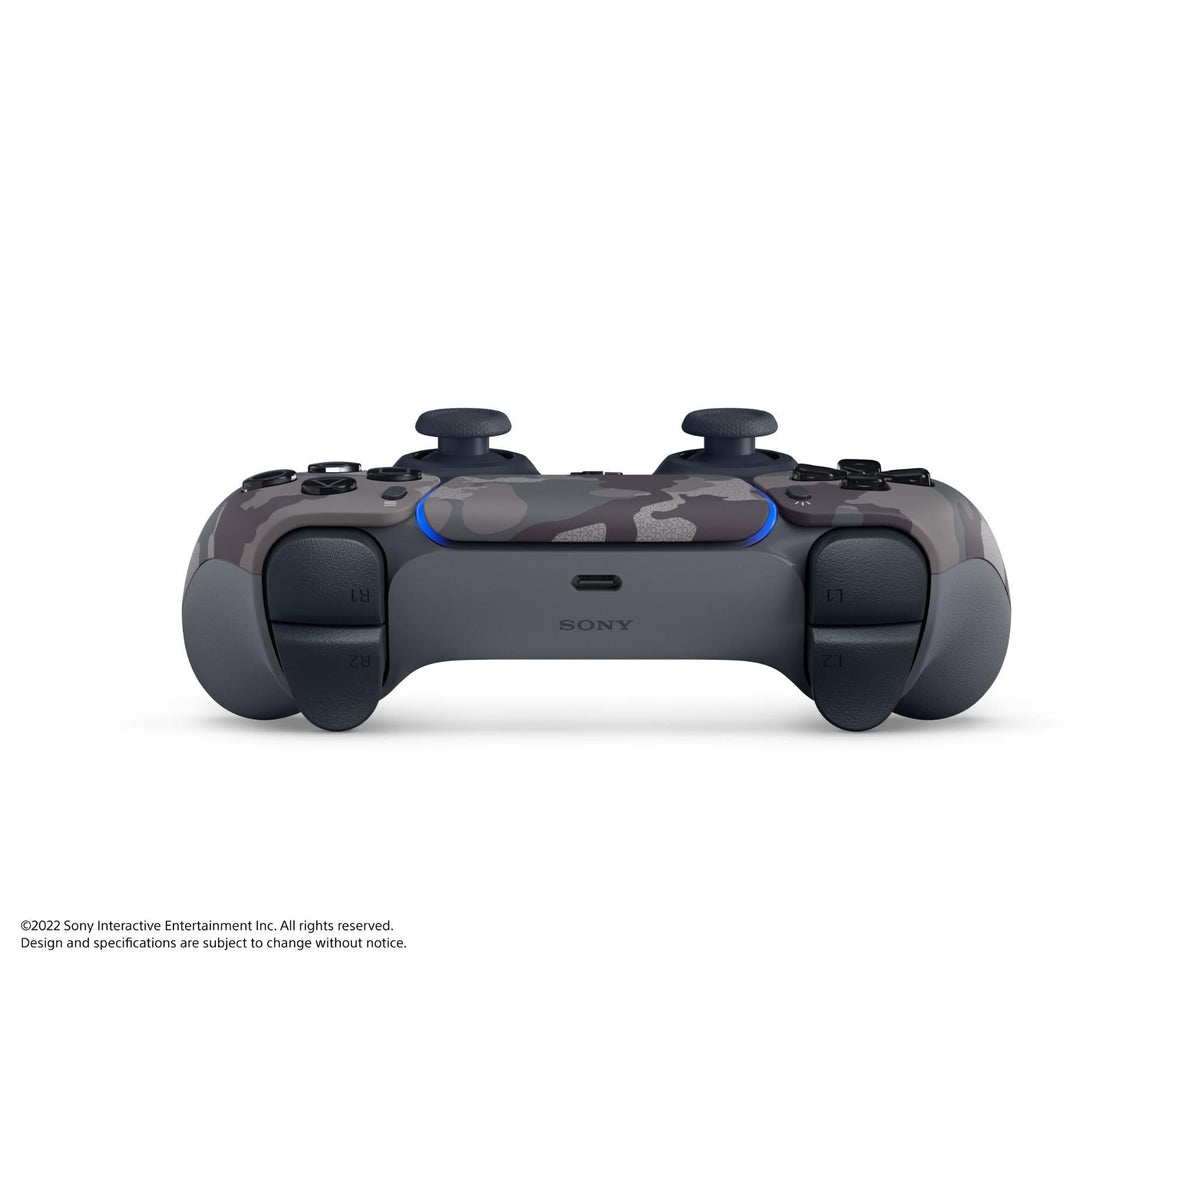 PS5 PlayStation 5 DualSense Controller - Grey Camouflage